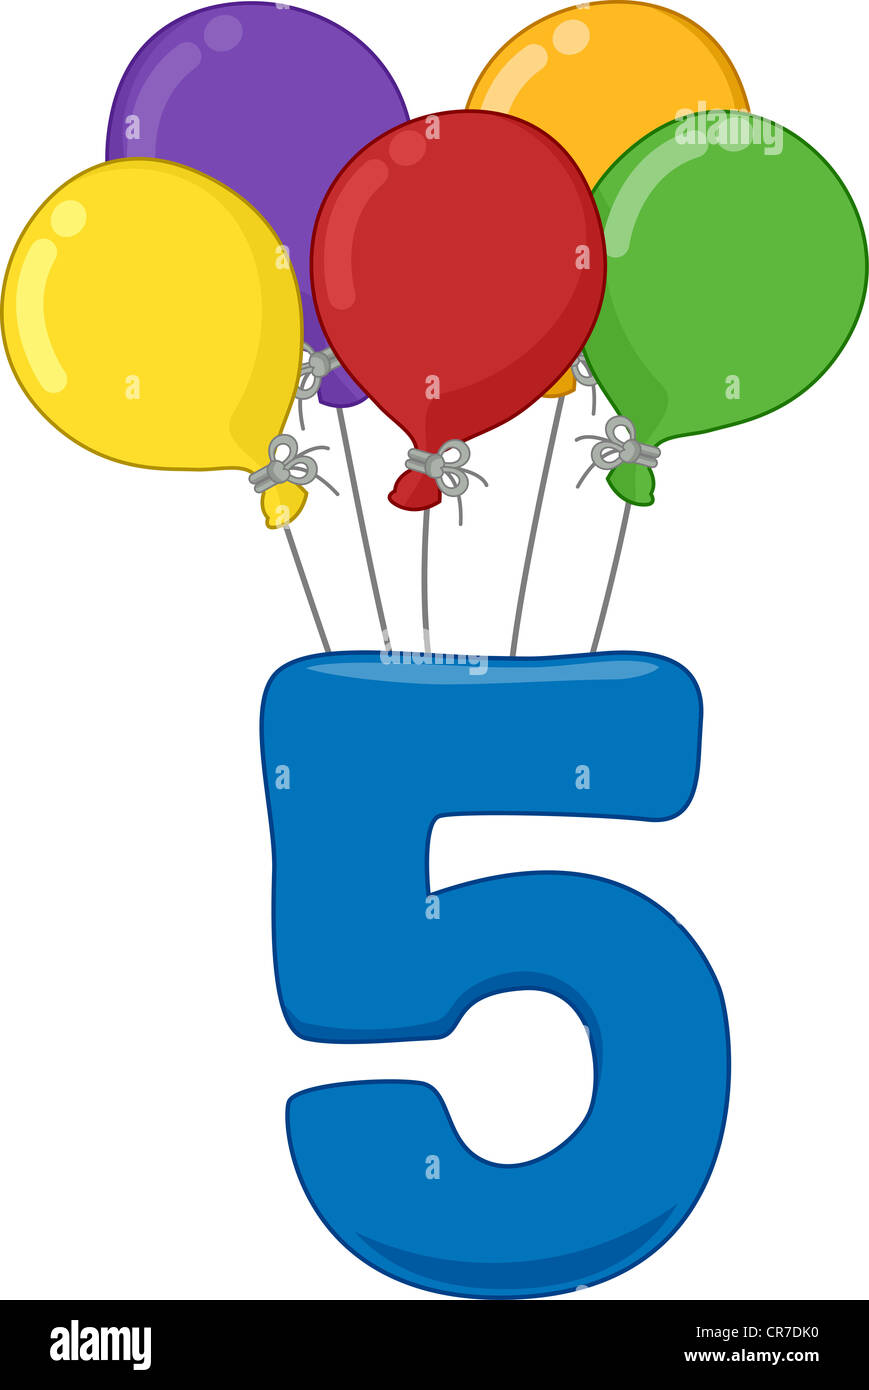 Illustration Featuring the Number 5 Stock Photo - Alamy